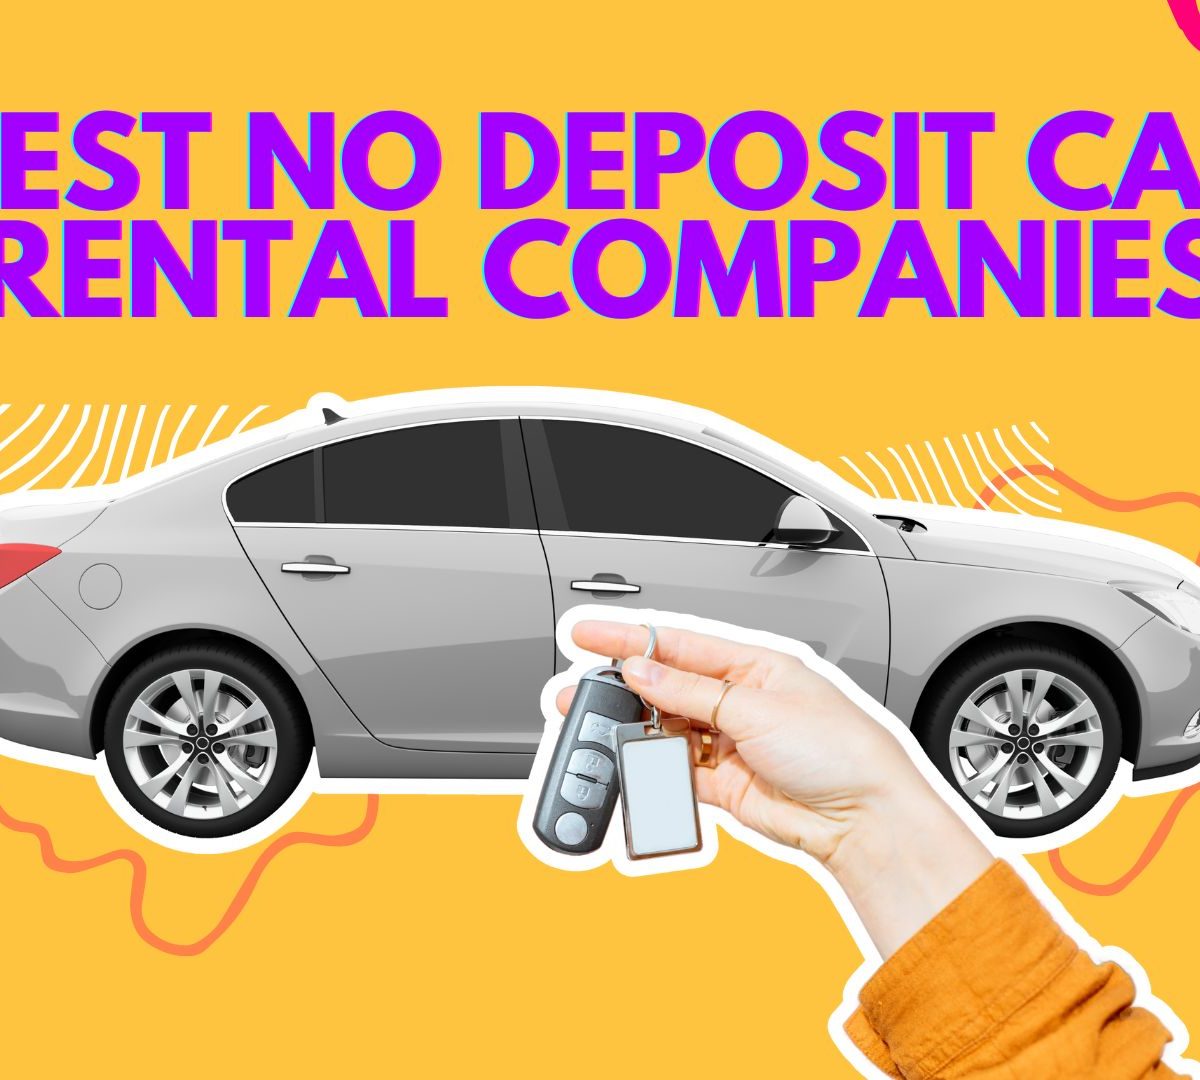 Top 10 No Deposit Car Rental Companies: Find the Best Deals for Your Next Trip